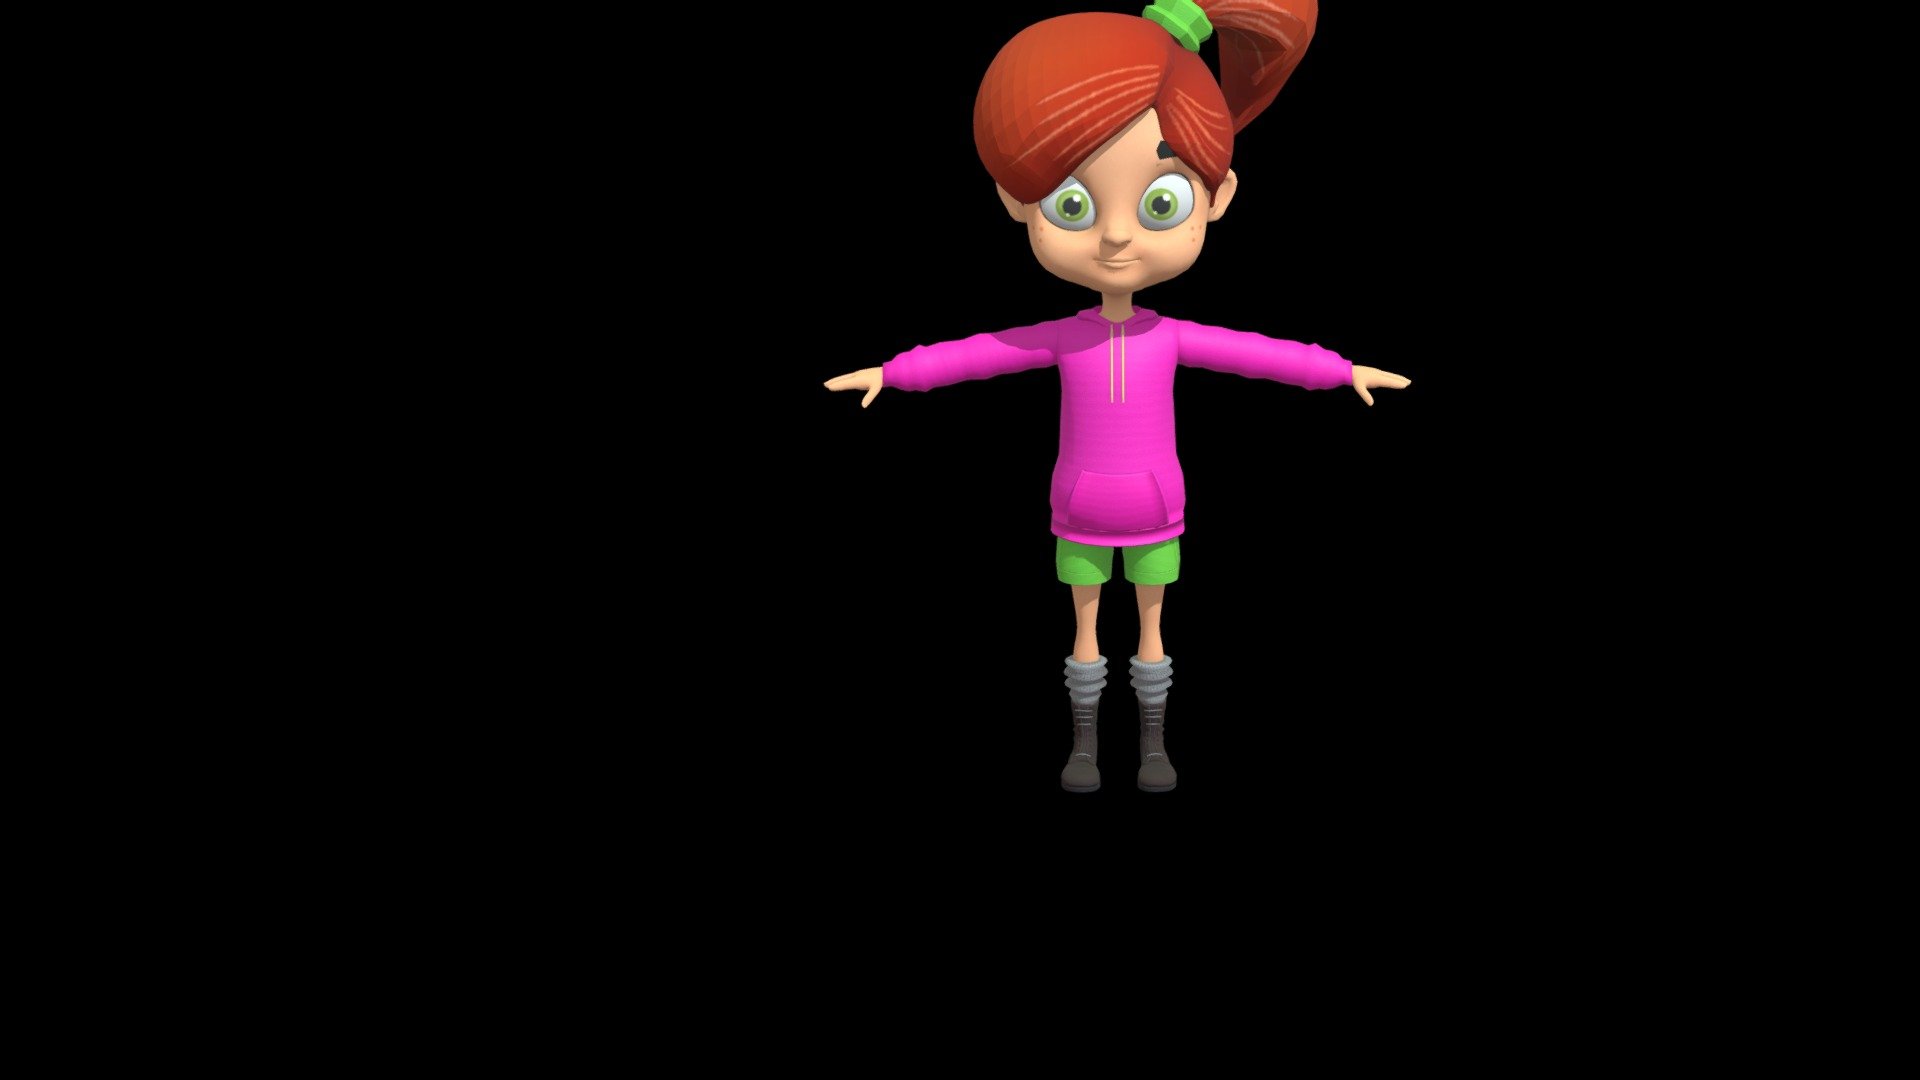 Girl character.
Texture included 3d model